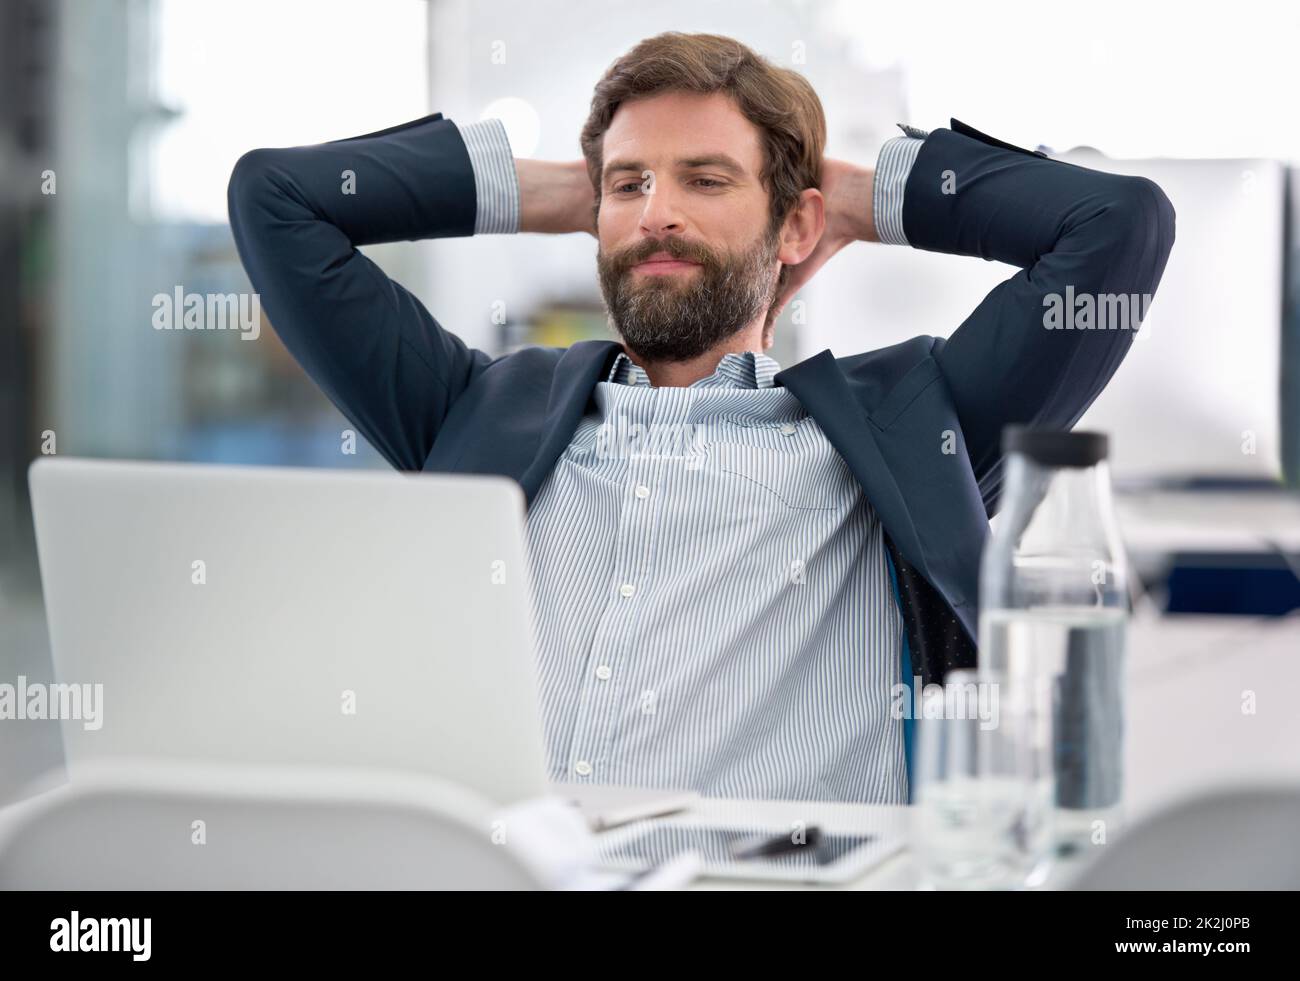 The satisfaction of a job well done Stock Photo